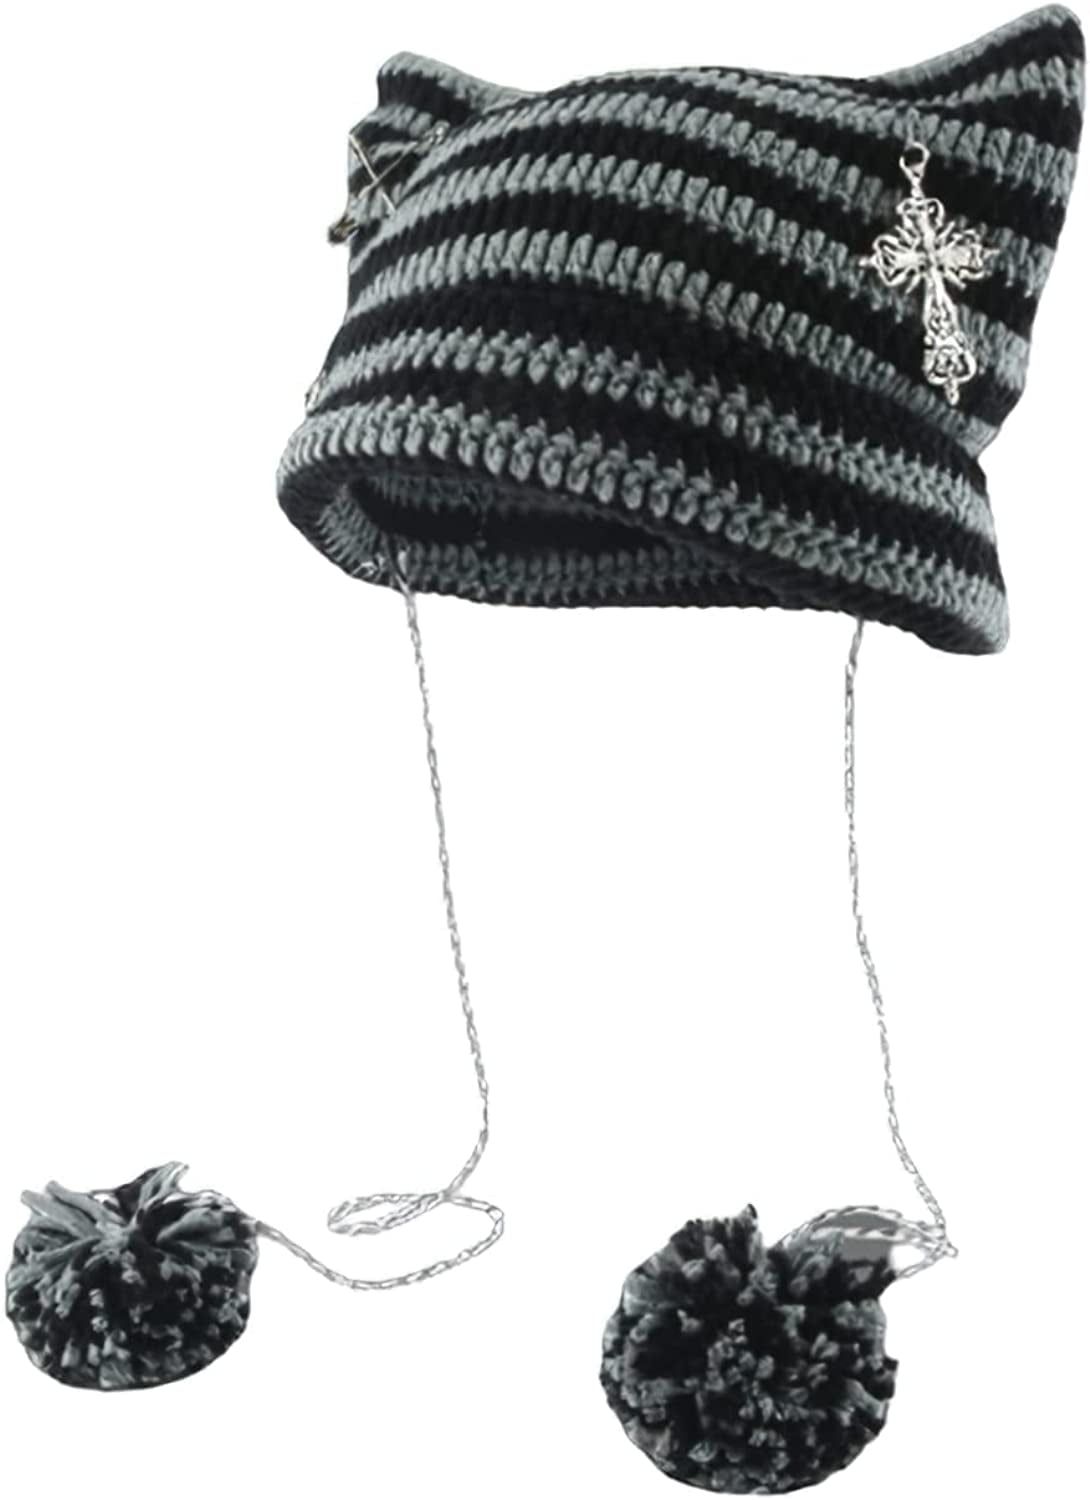 Fight the Cold with Knitted Hats